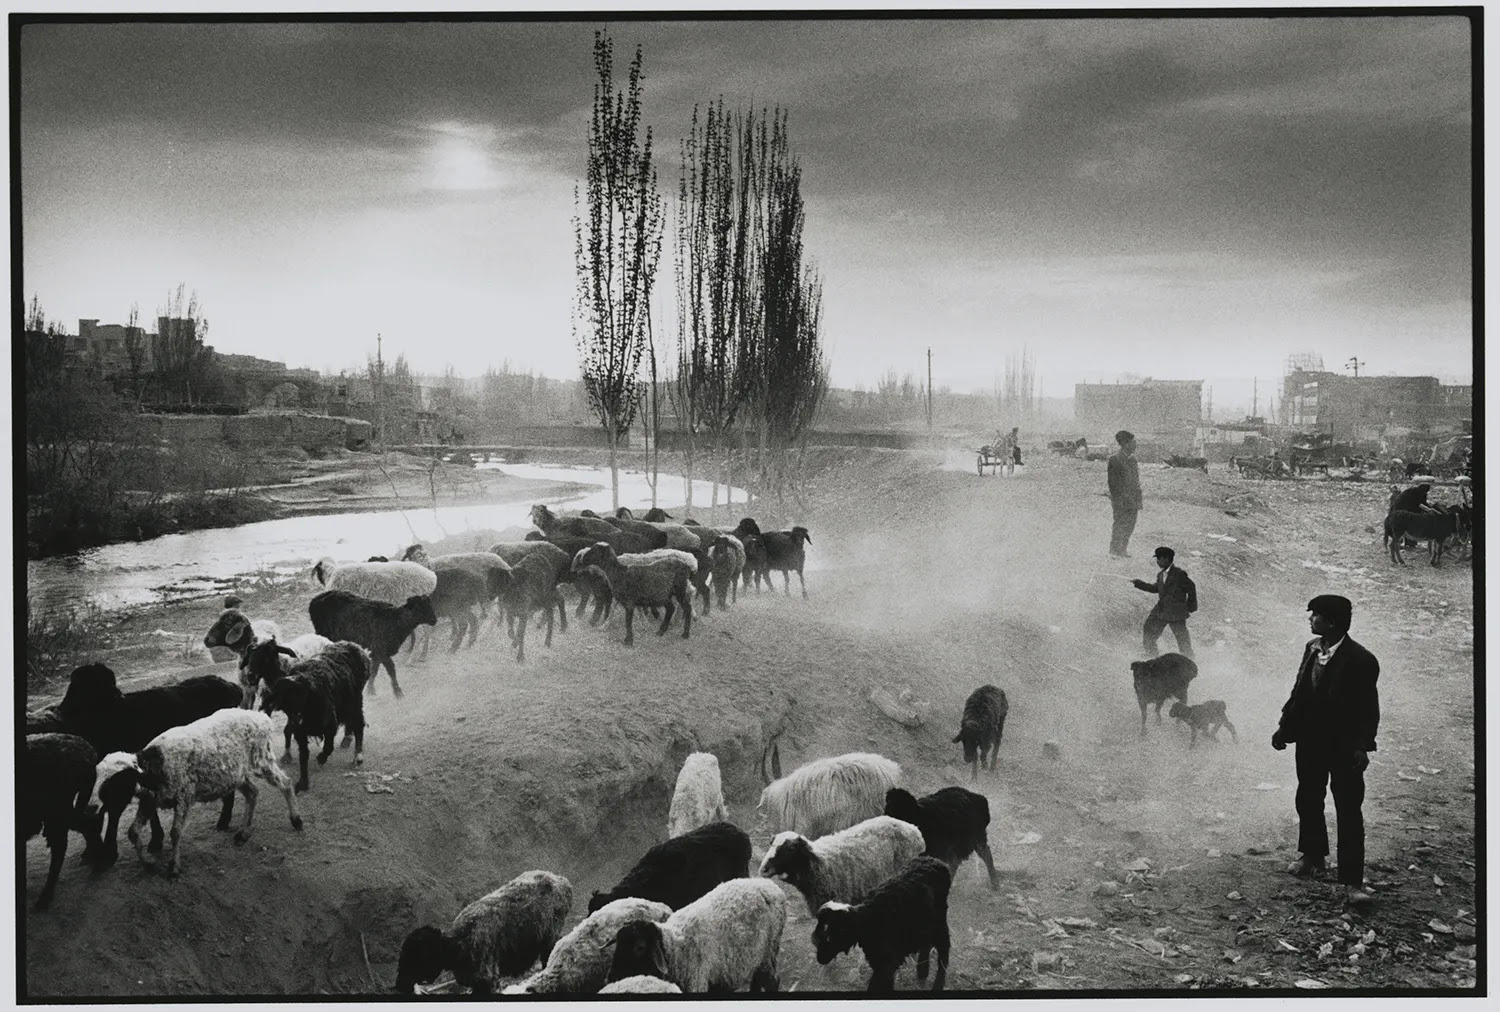 Men are seen silhouetted in a dusty landscape as they move a flock of sheep along a river. Buildings and trees are seen in the distance.